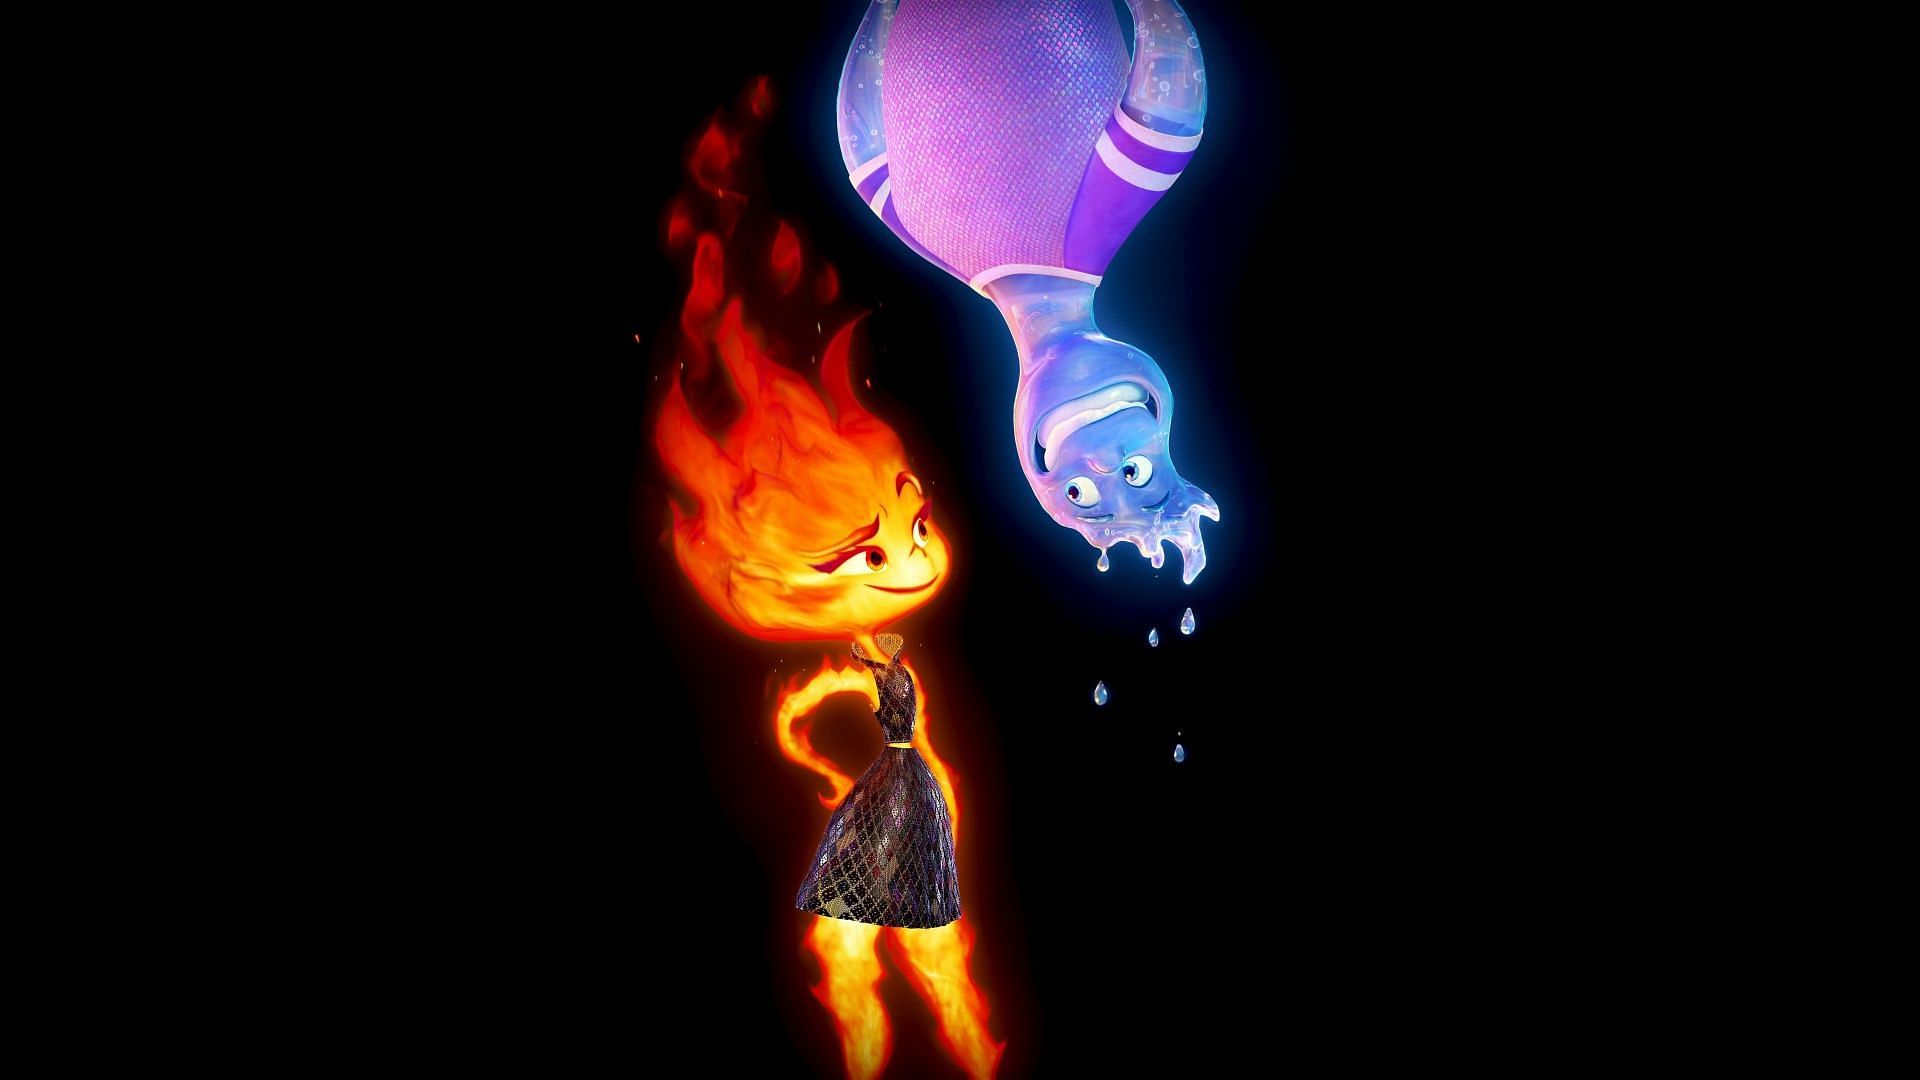 The main plot of Elemental revolves around a love story between Ember, a fire element and Wade, a water element (Image via Pixar)